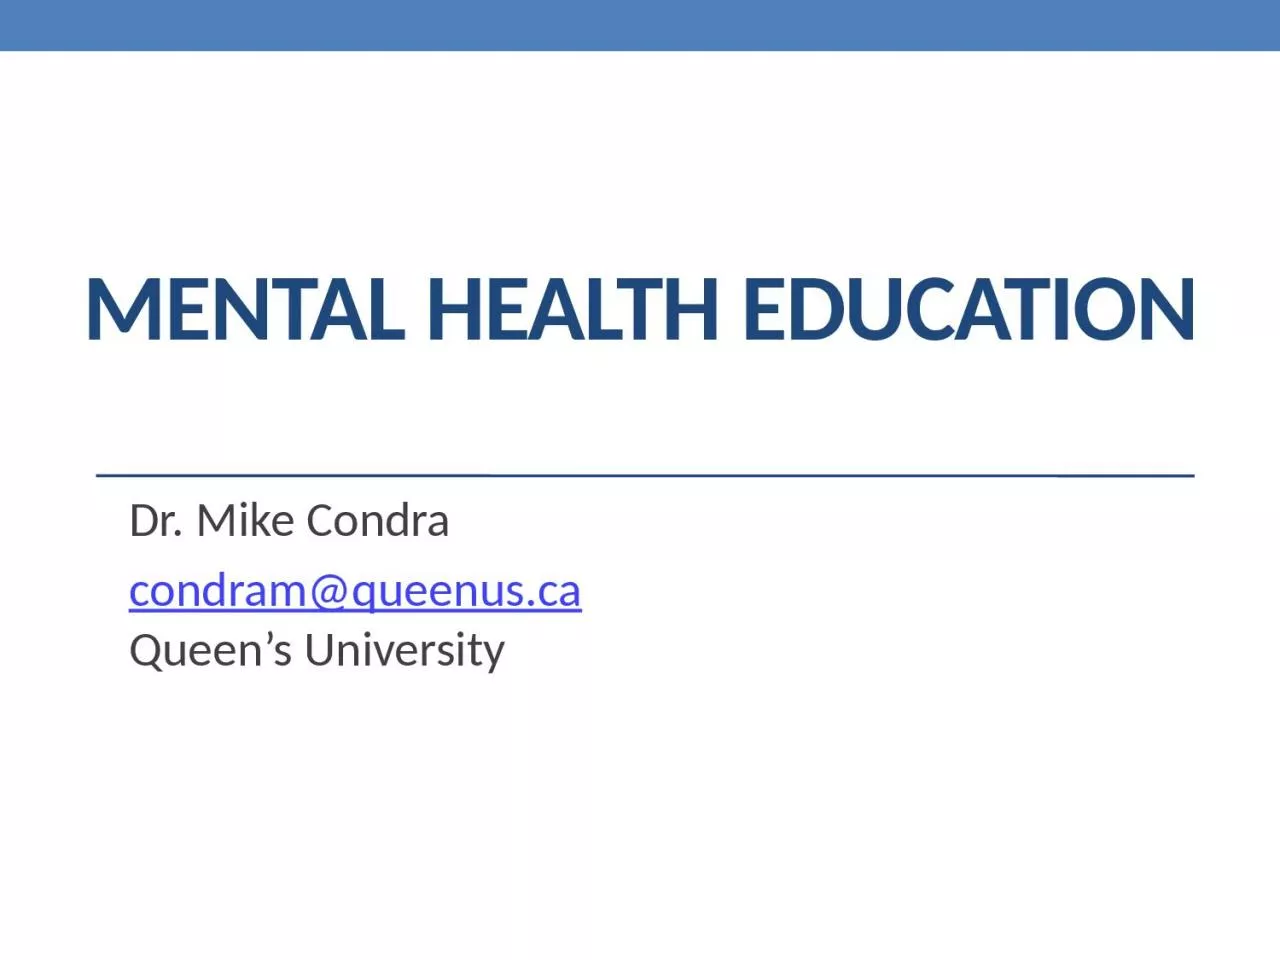 Mental Health education Dr. Mike Condra